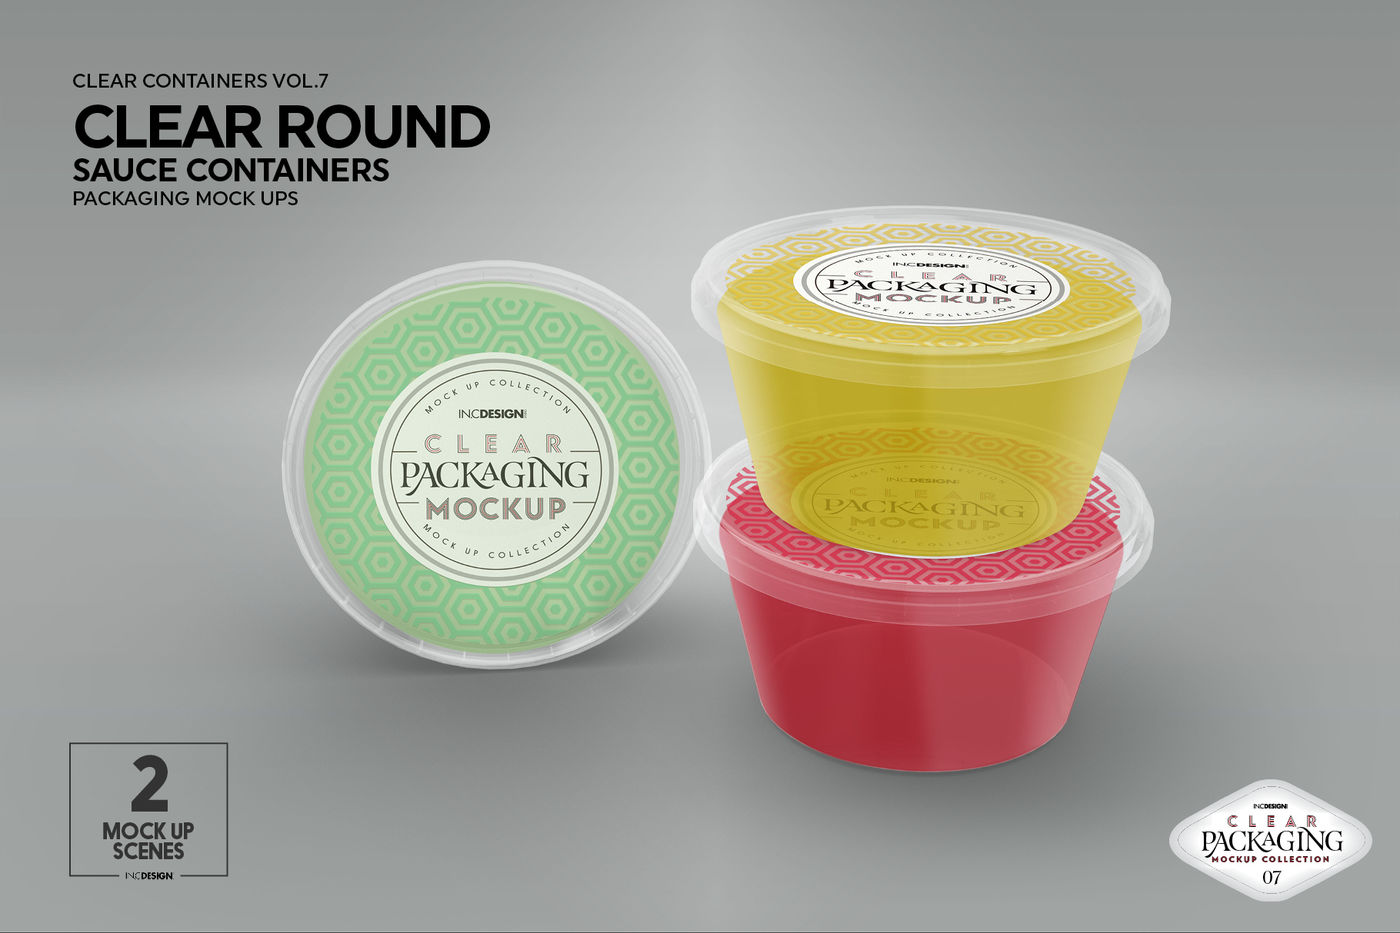 https://media1.thehungryjpeg.com/thumbs2/ori_116683_d0f17d7bd5077fa76f70eb9558f13bc09b992972_clear-round-sauce-containers-packaging-mockup.jpg